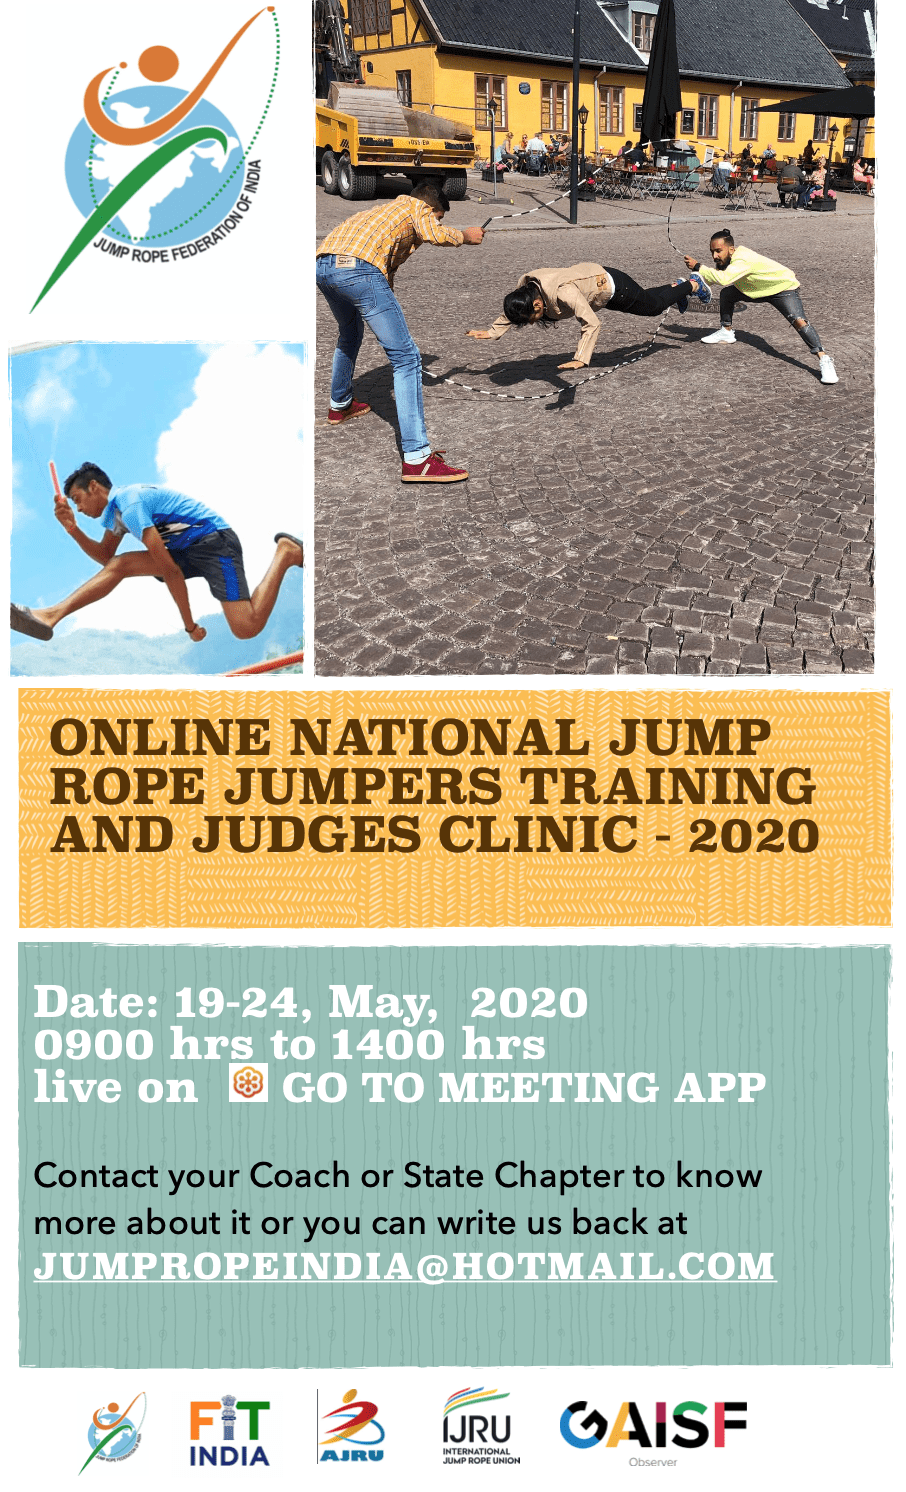 Online National Jump Rope Jumper’s Training & Judges Clinic 2020